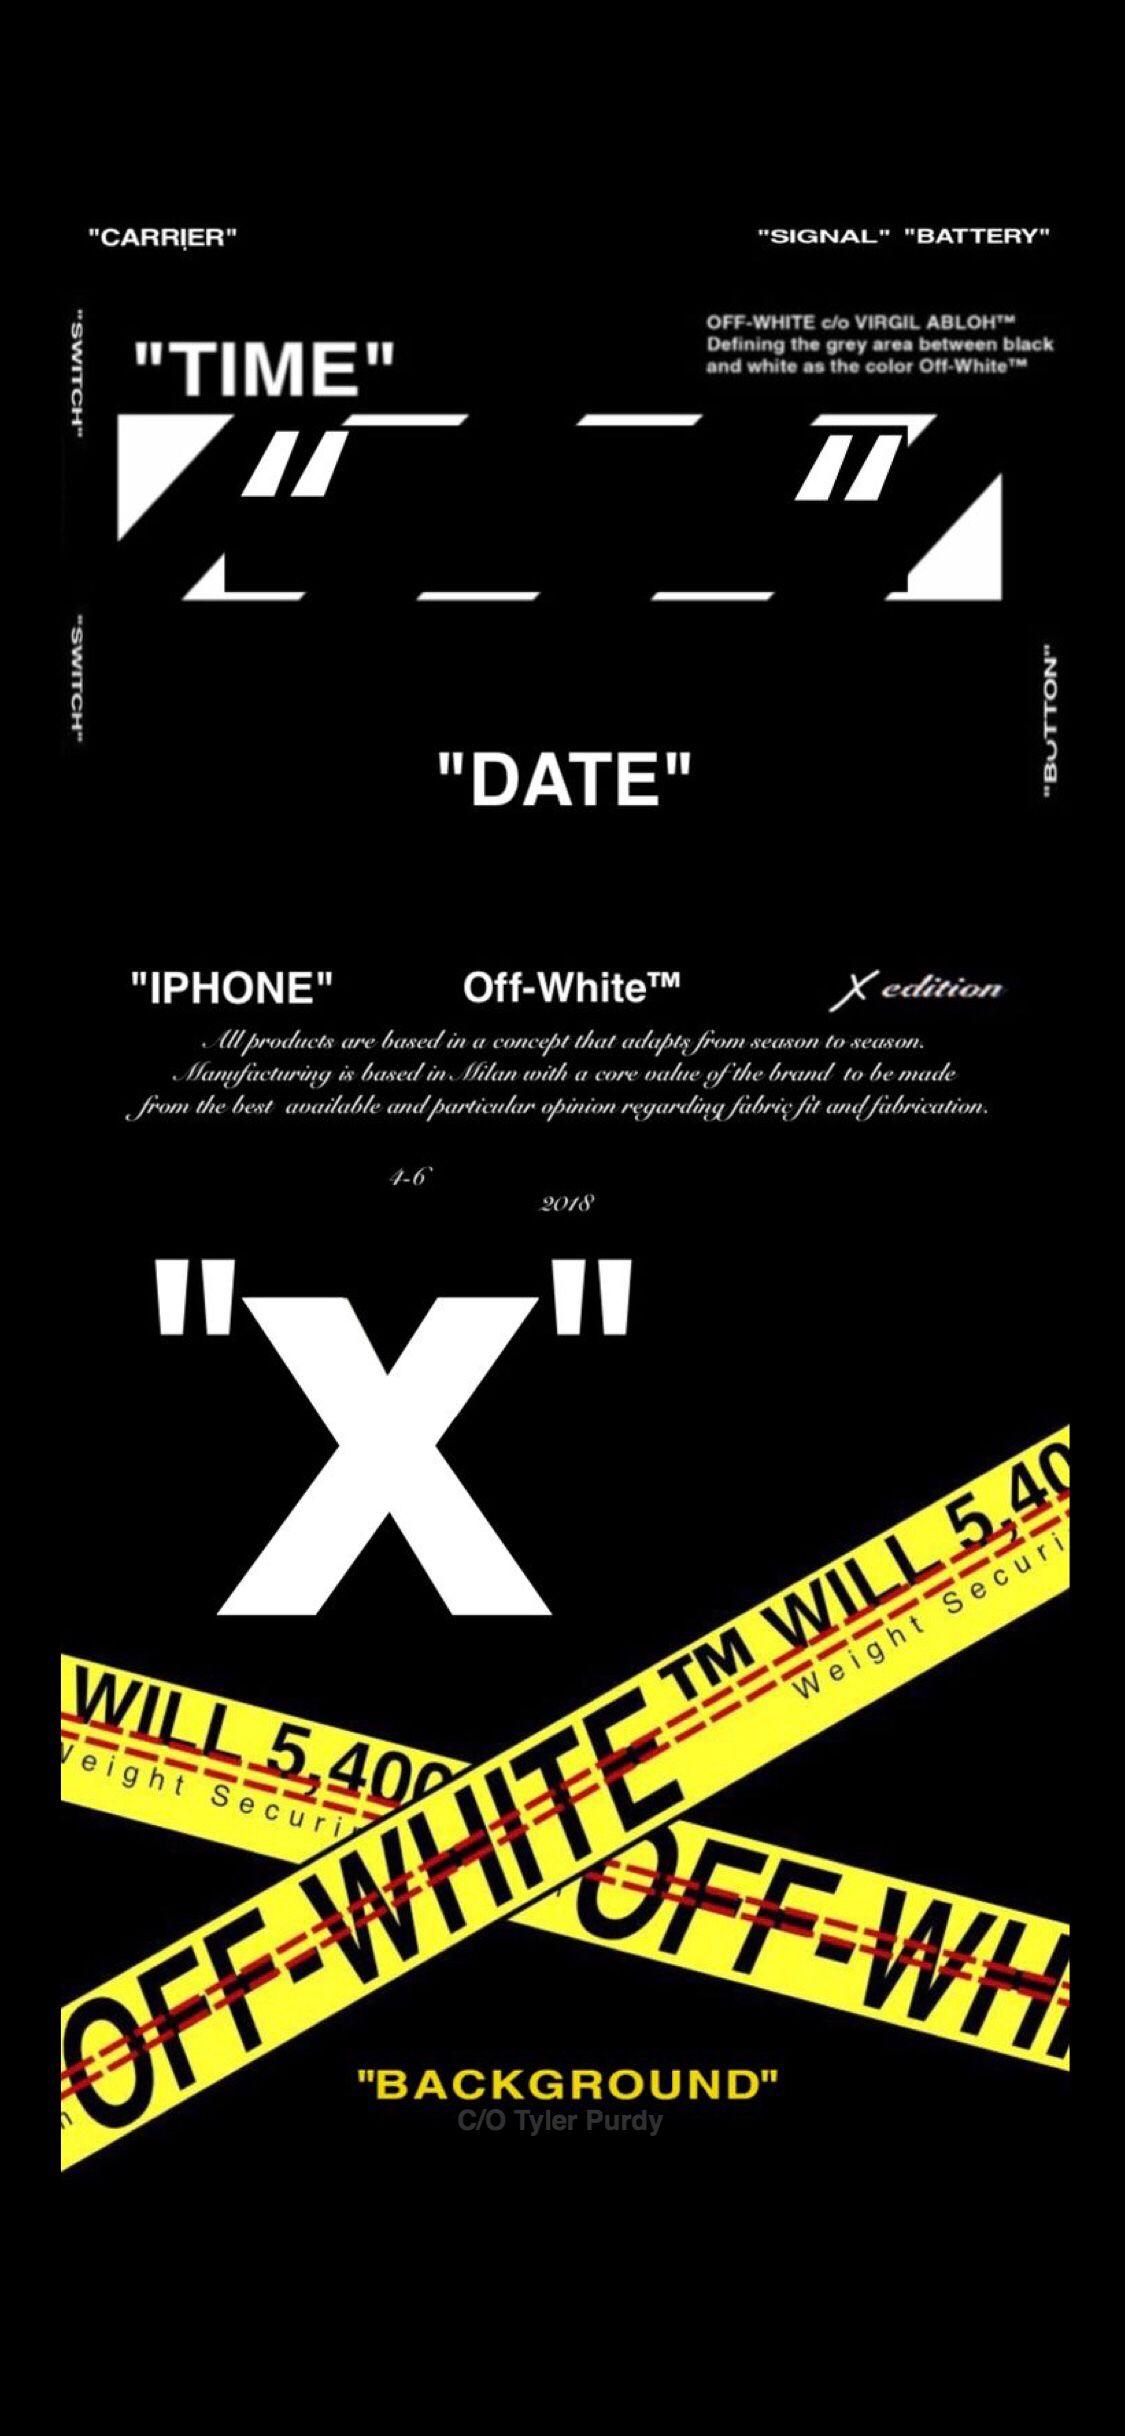 OFF-WHITE wallpaper  Cool nike wallpapers, Hypebeast iphone